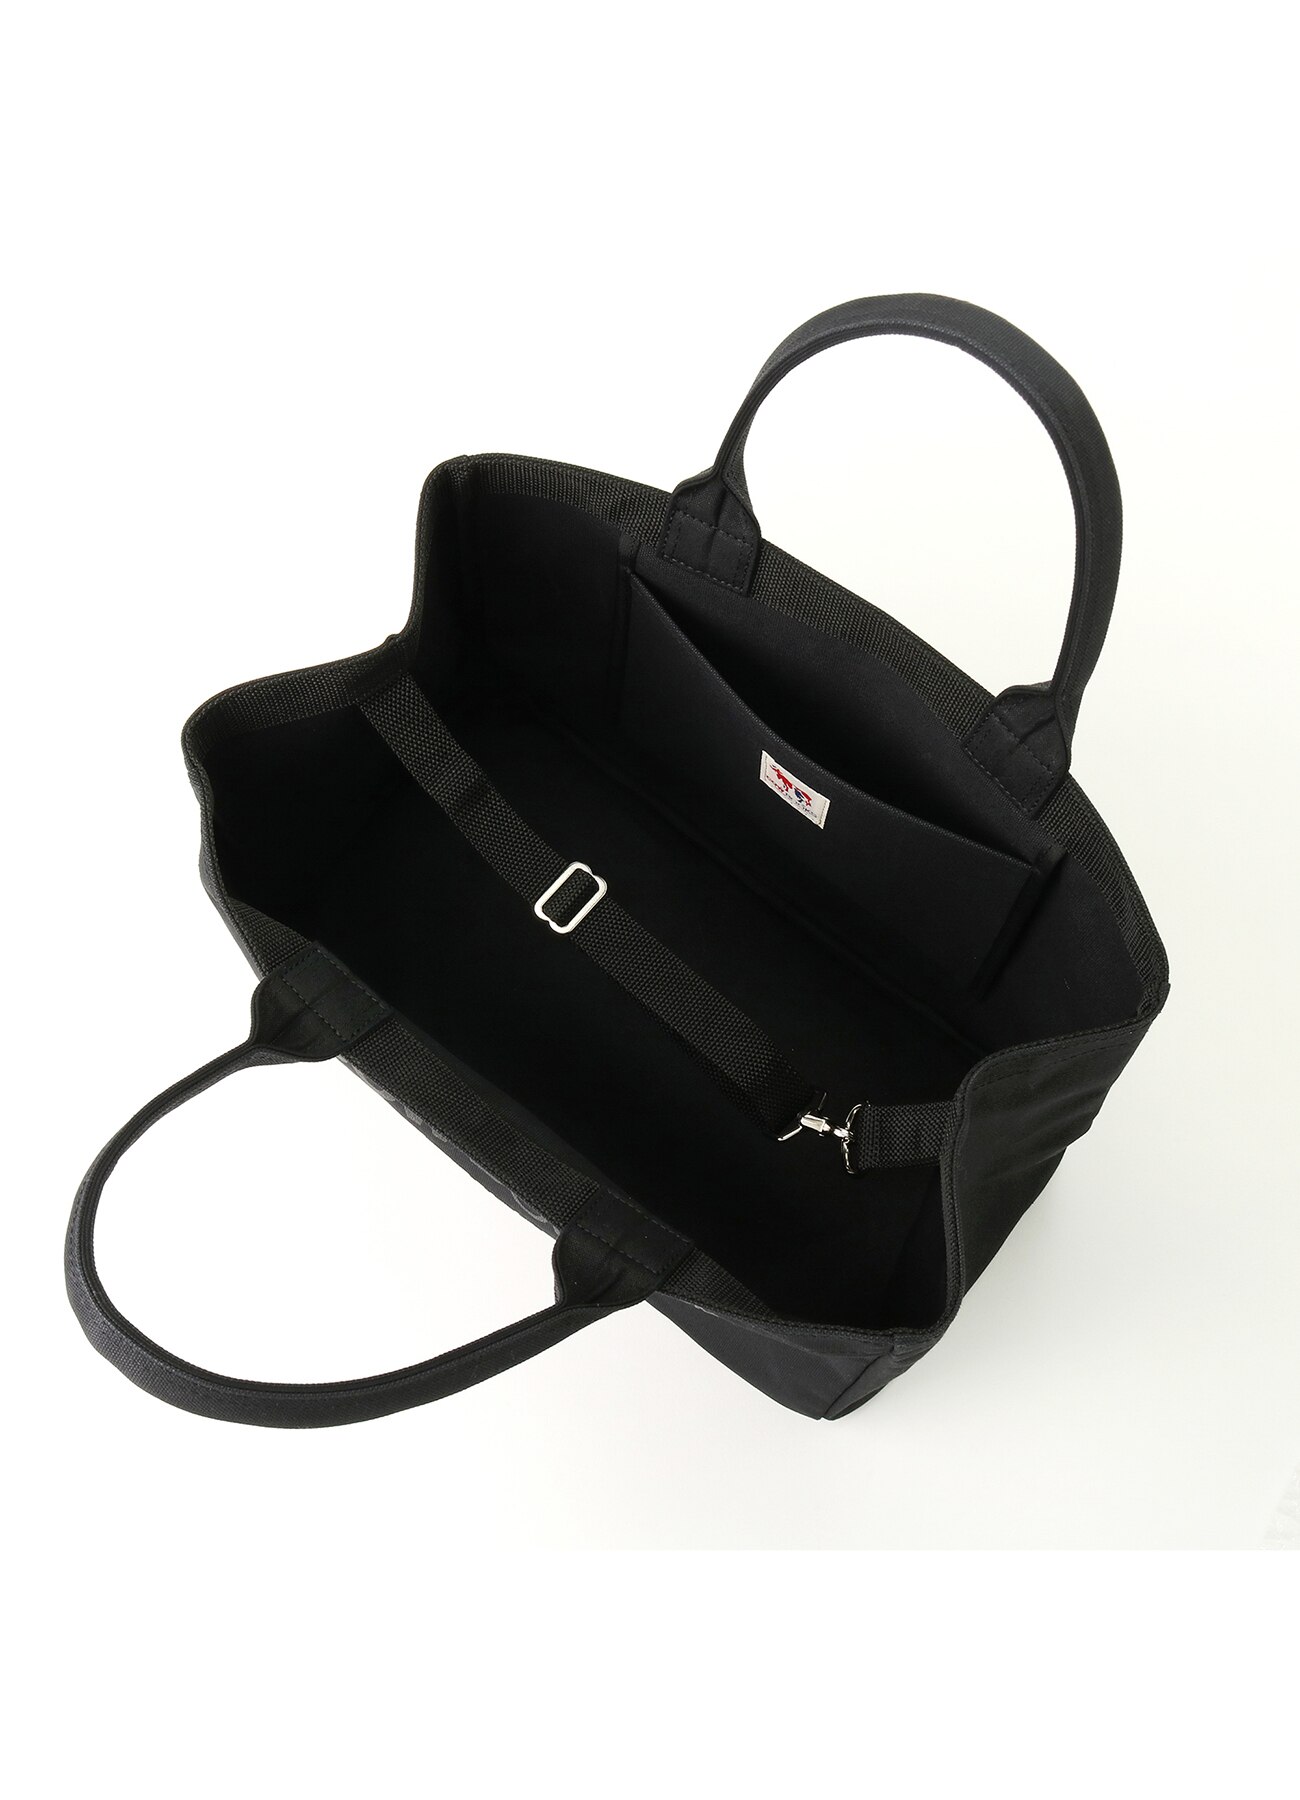 WILDSIDE × COW BOOKS Container Tote Small(FREE SIZE BLACK): COW